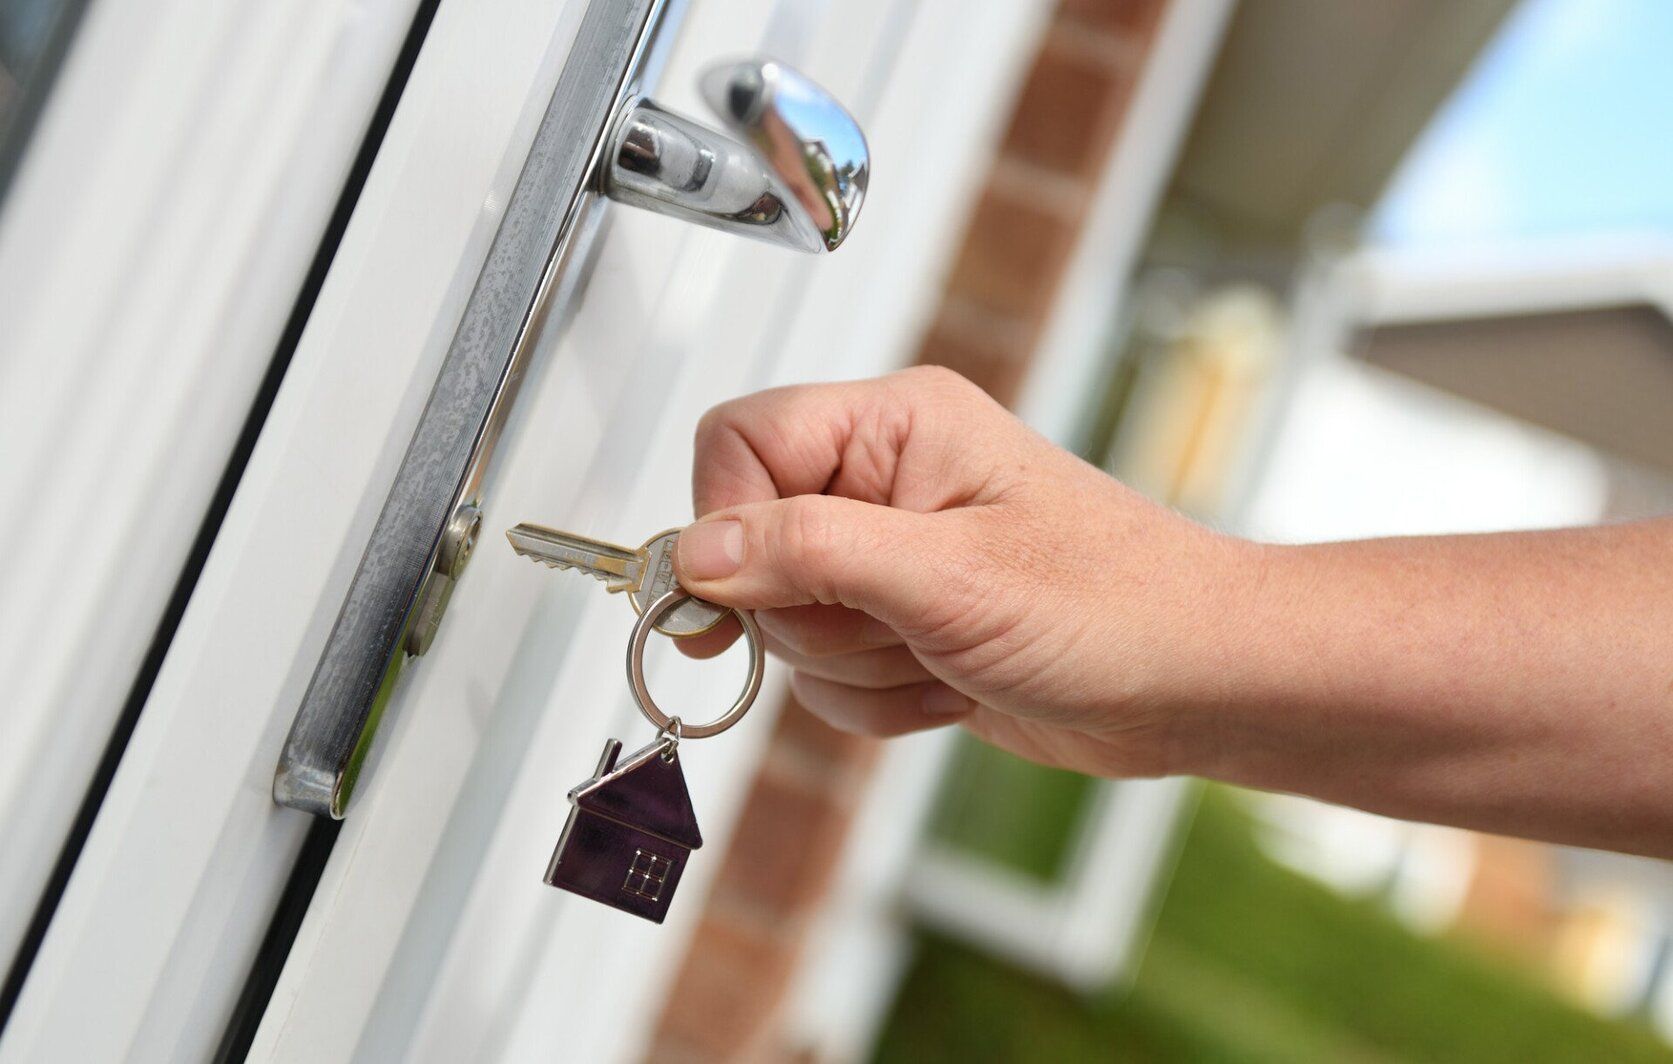 Our locksmiths specialise in door lock fitting and repairs